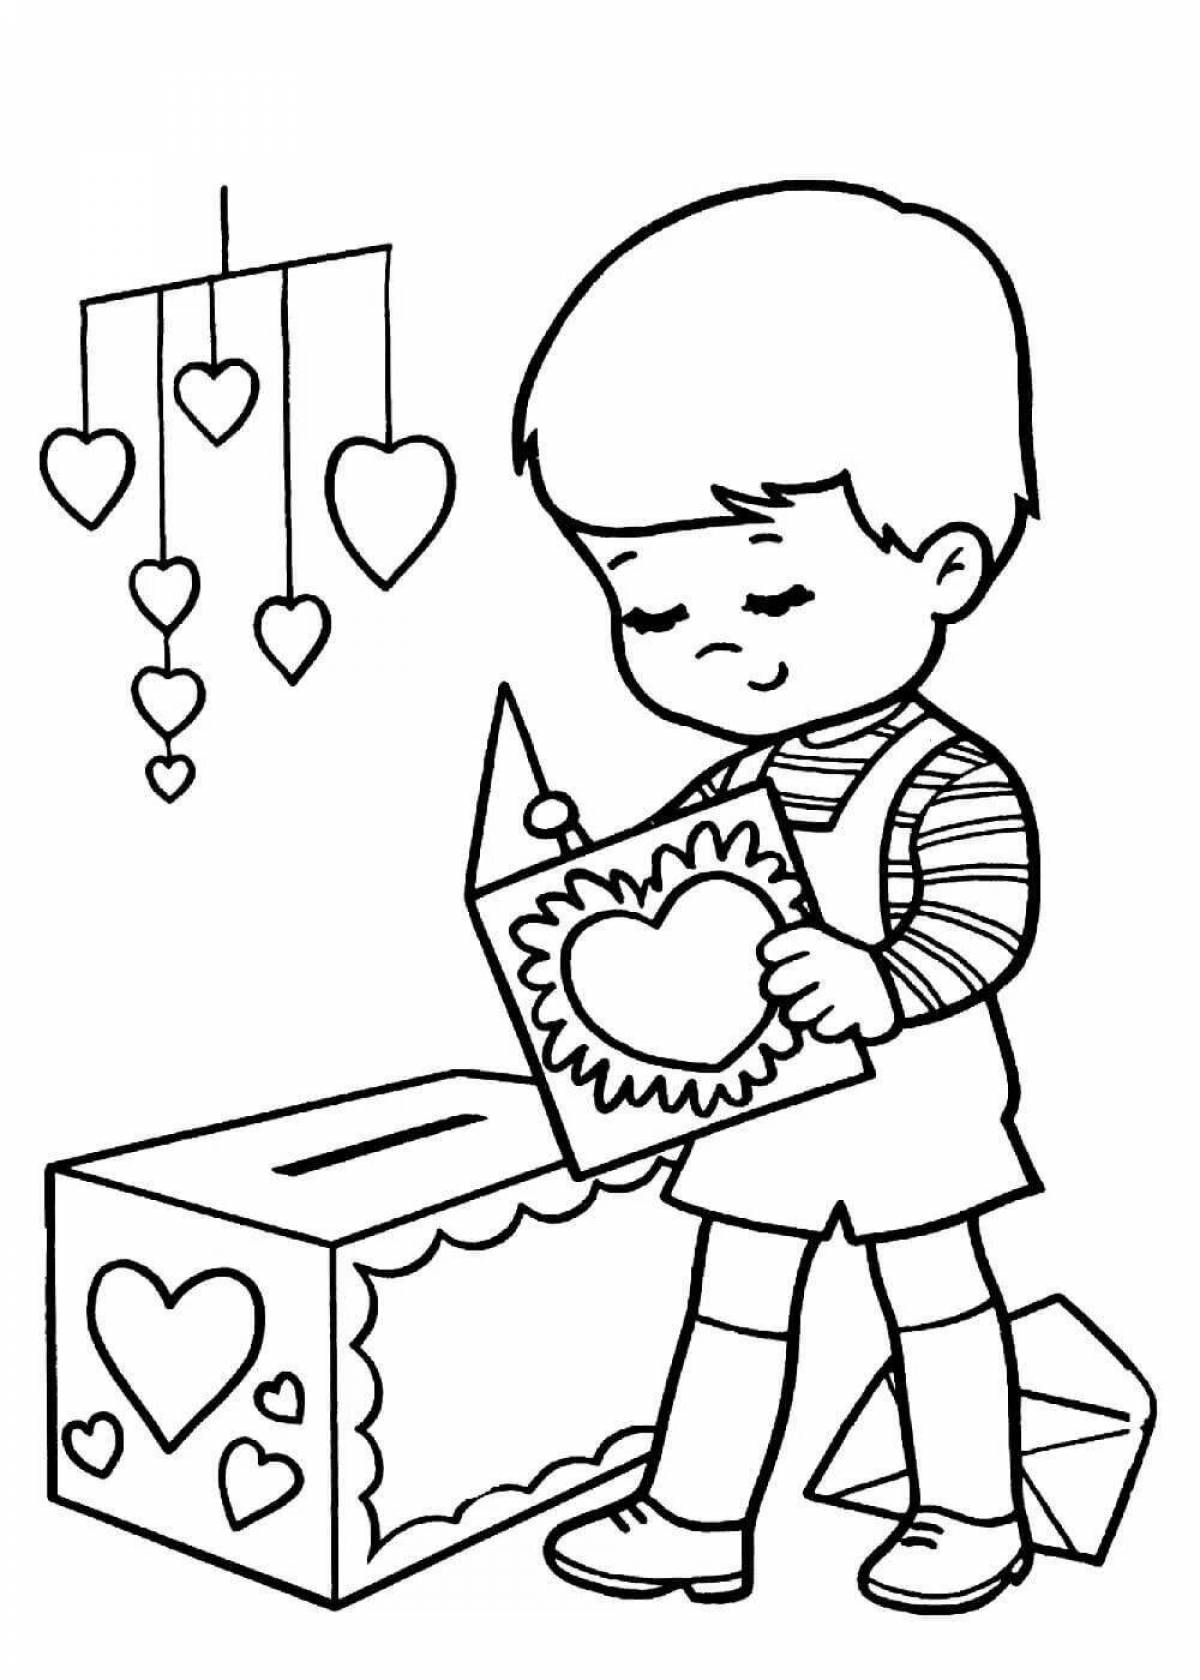 Soulful valentine's day coloring book for kids